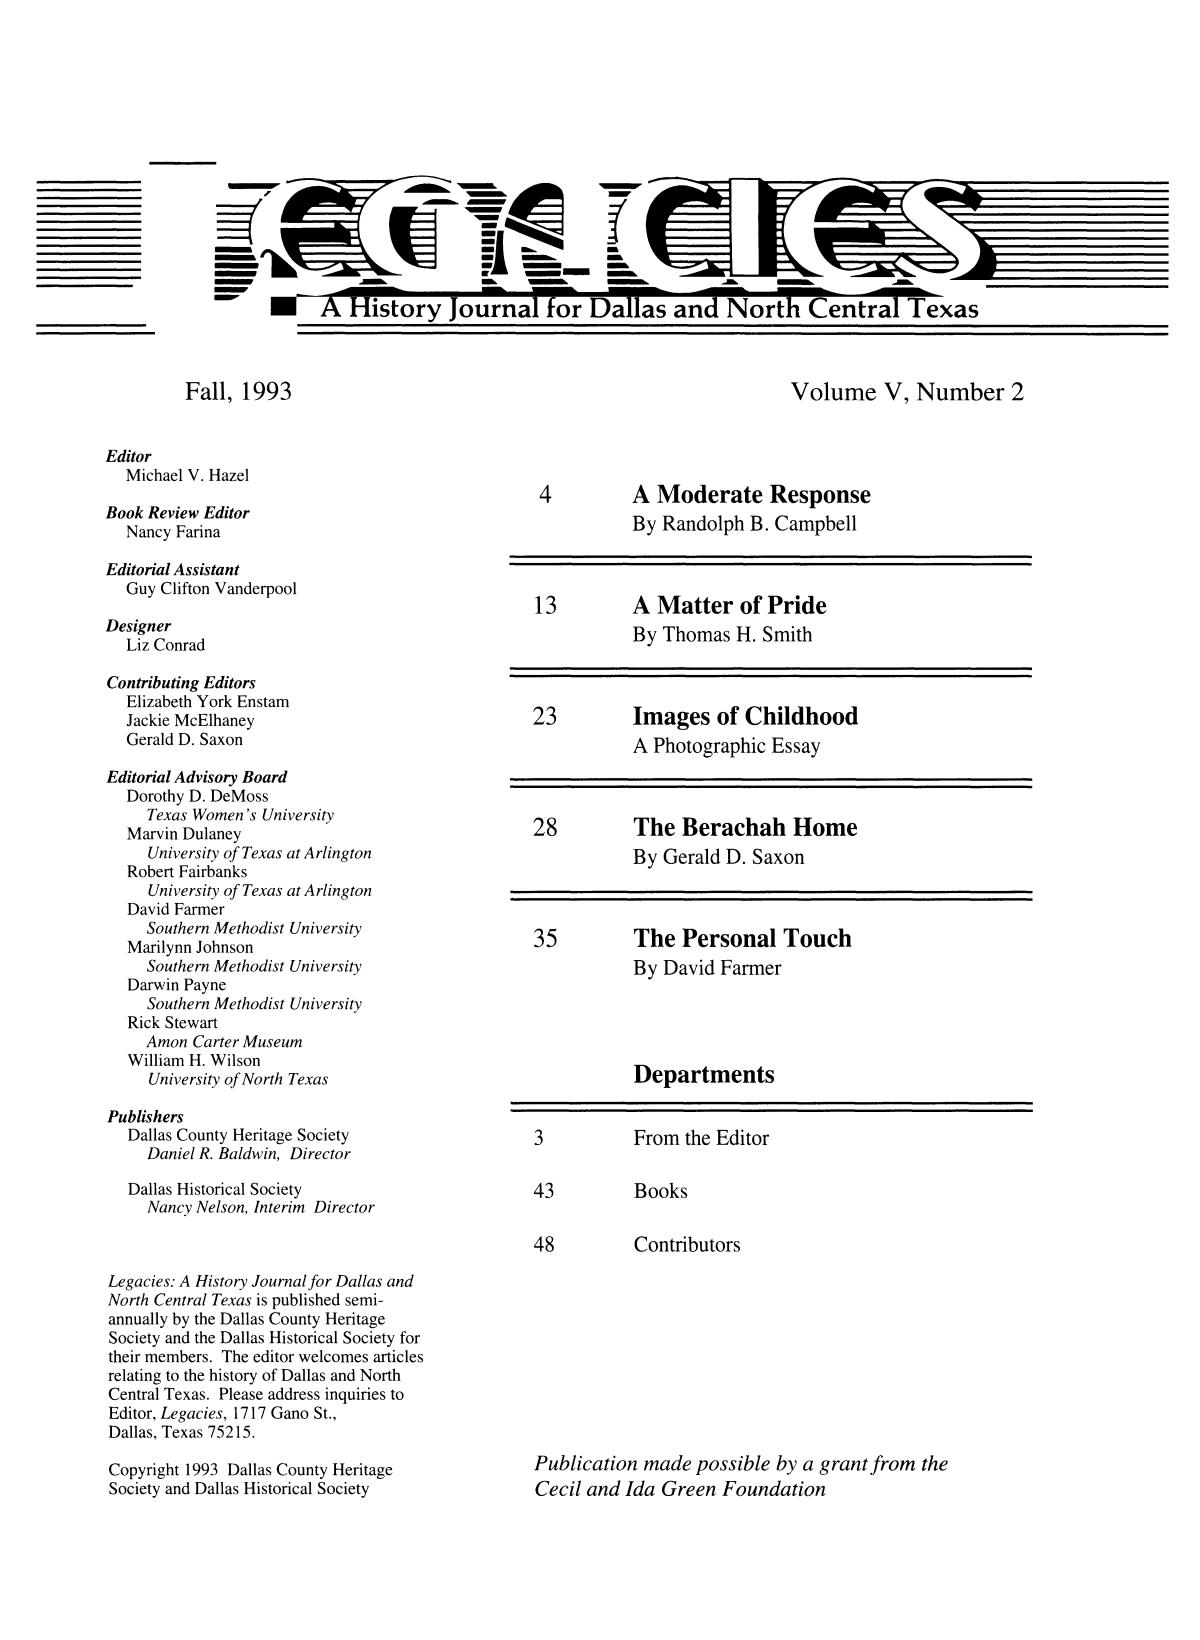 Legacies: A History Journal for Dallas and North Central Texas, Volume 5, Number 2, Fall, 1993
                                                
                                                    1
                                                